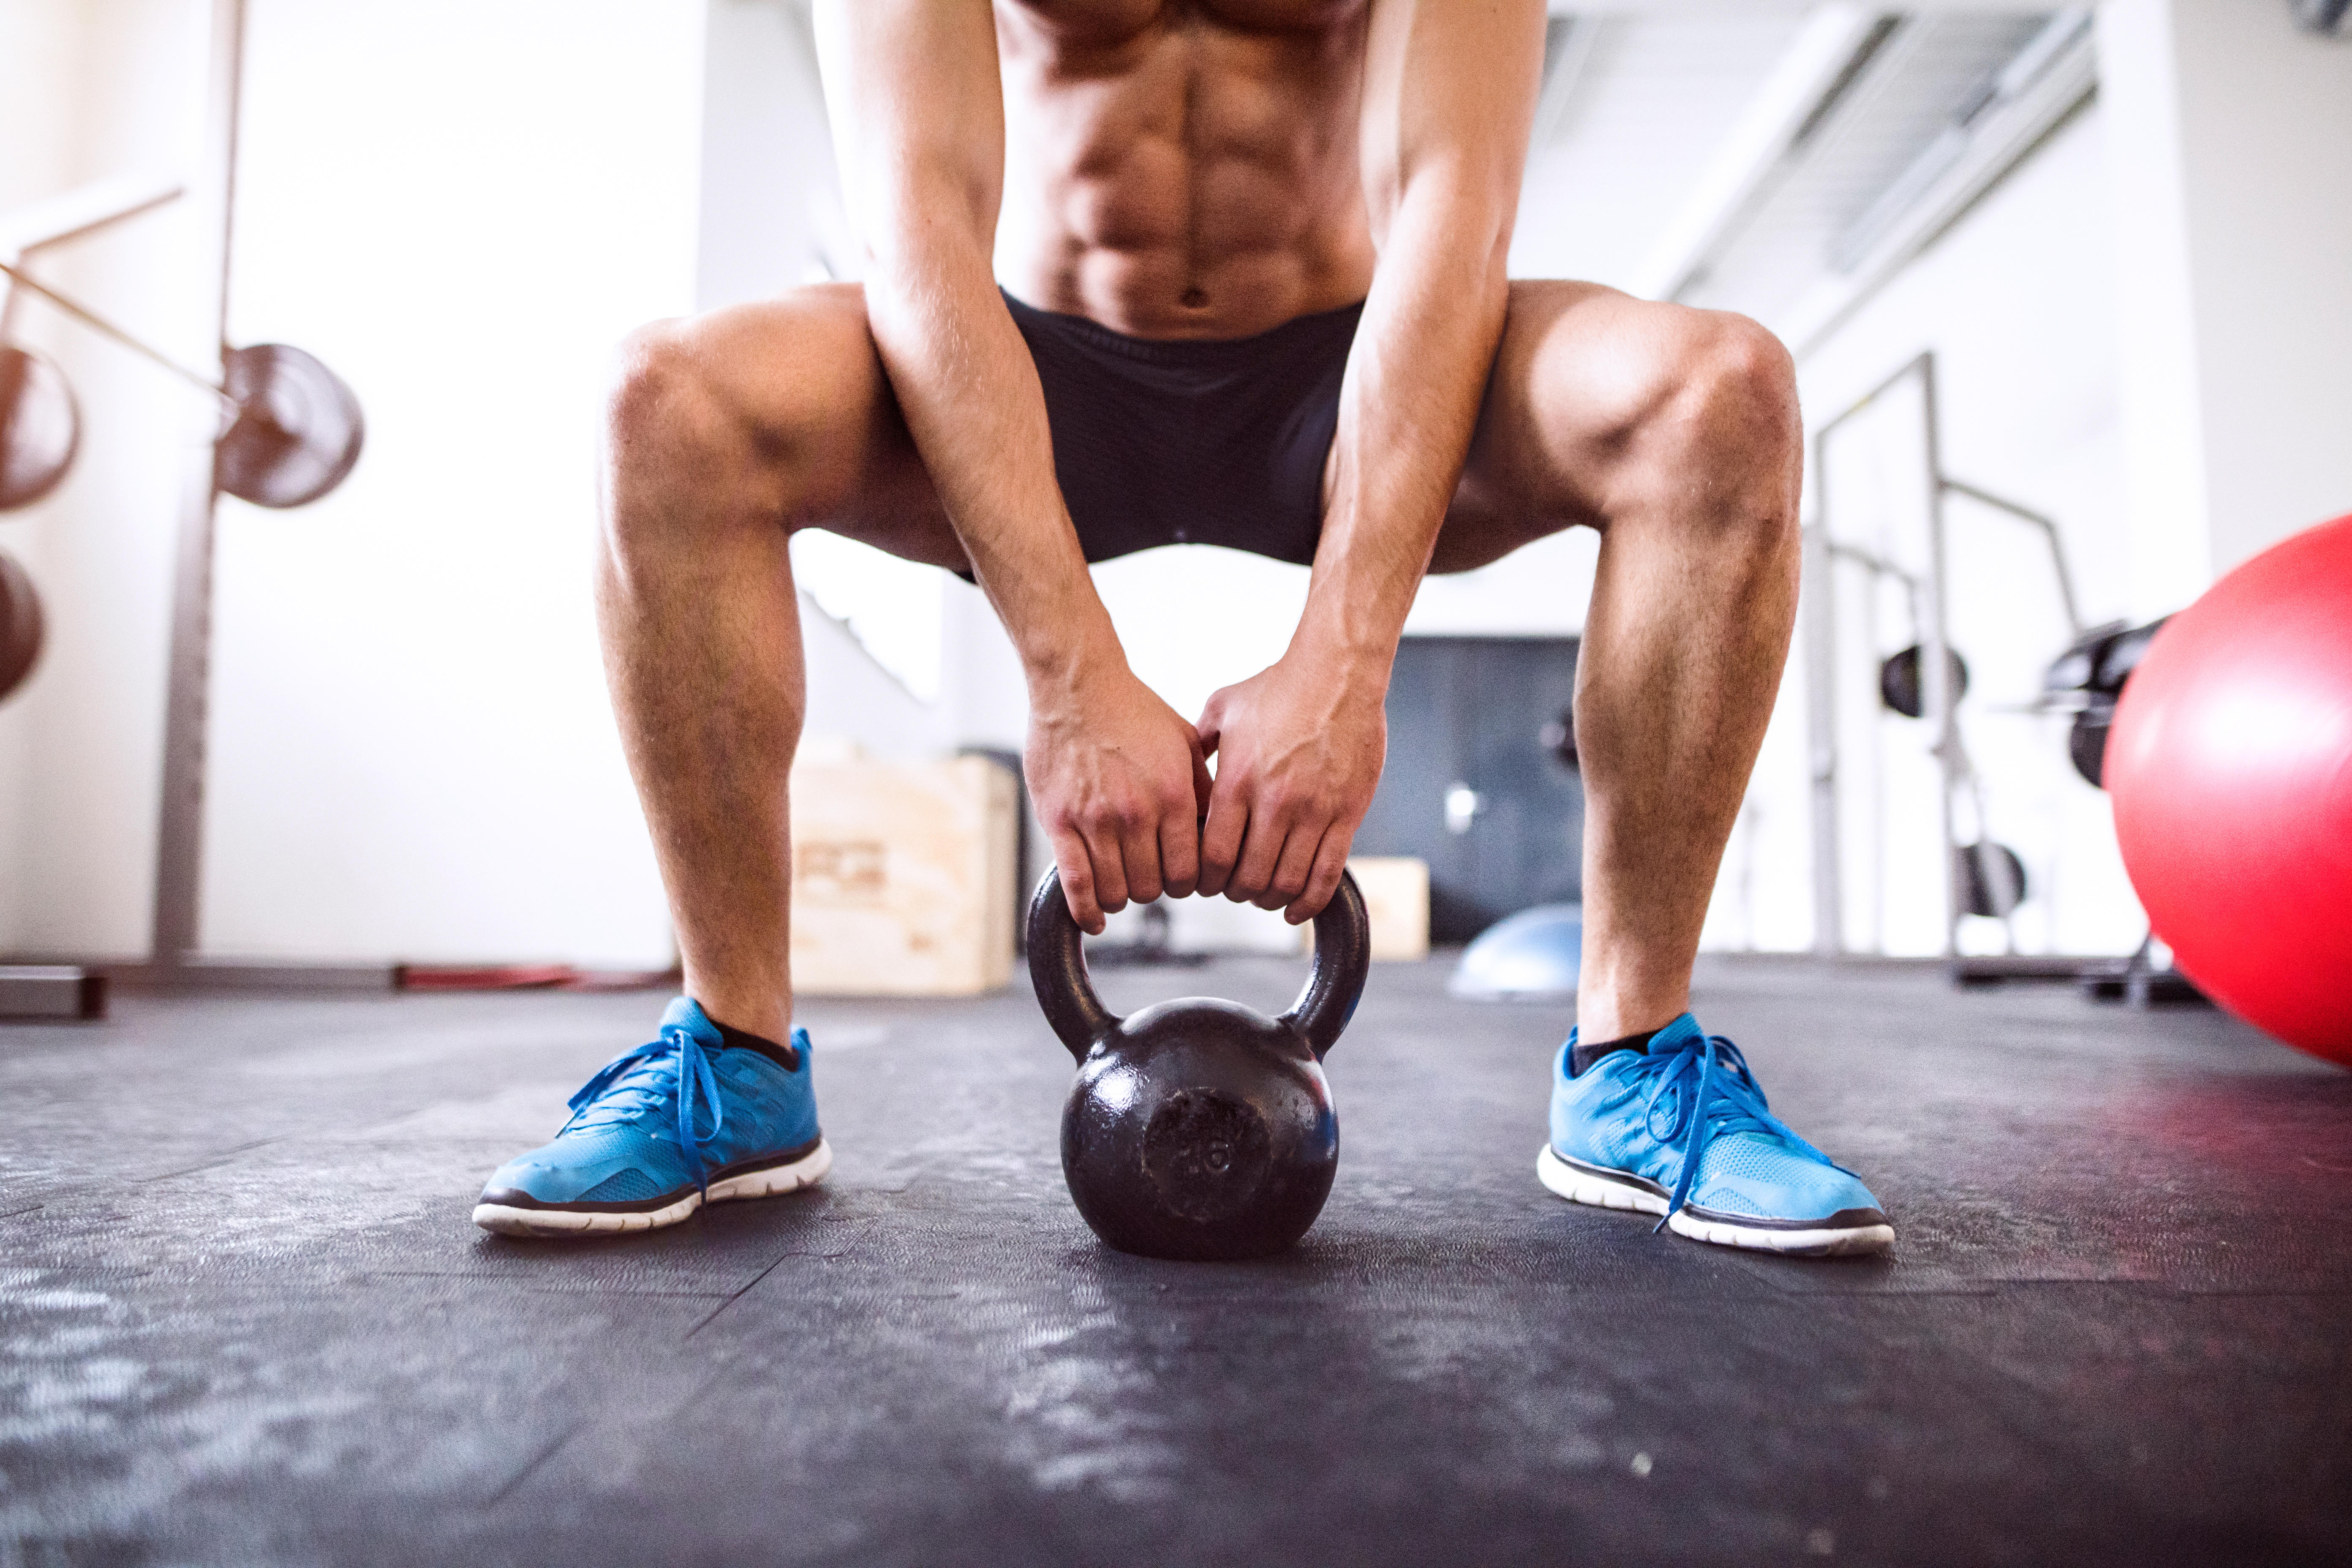 Man doing squats with a kettlebell in a gym